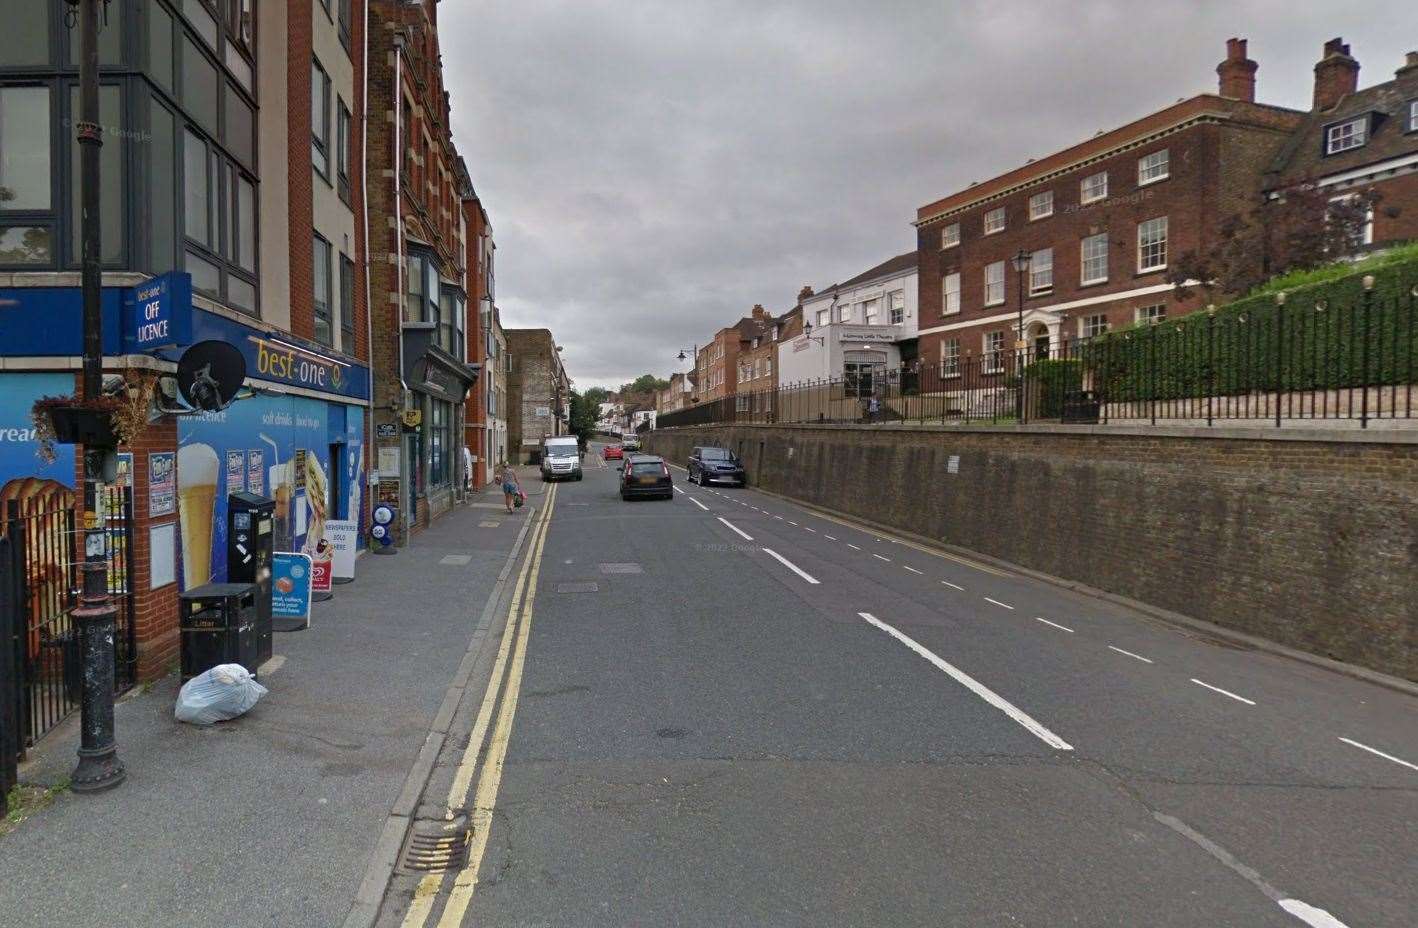 The man was discovered with injuries at a property in Chatham High Street. Picture: Google